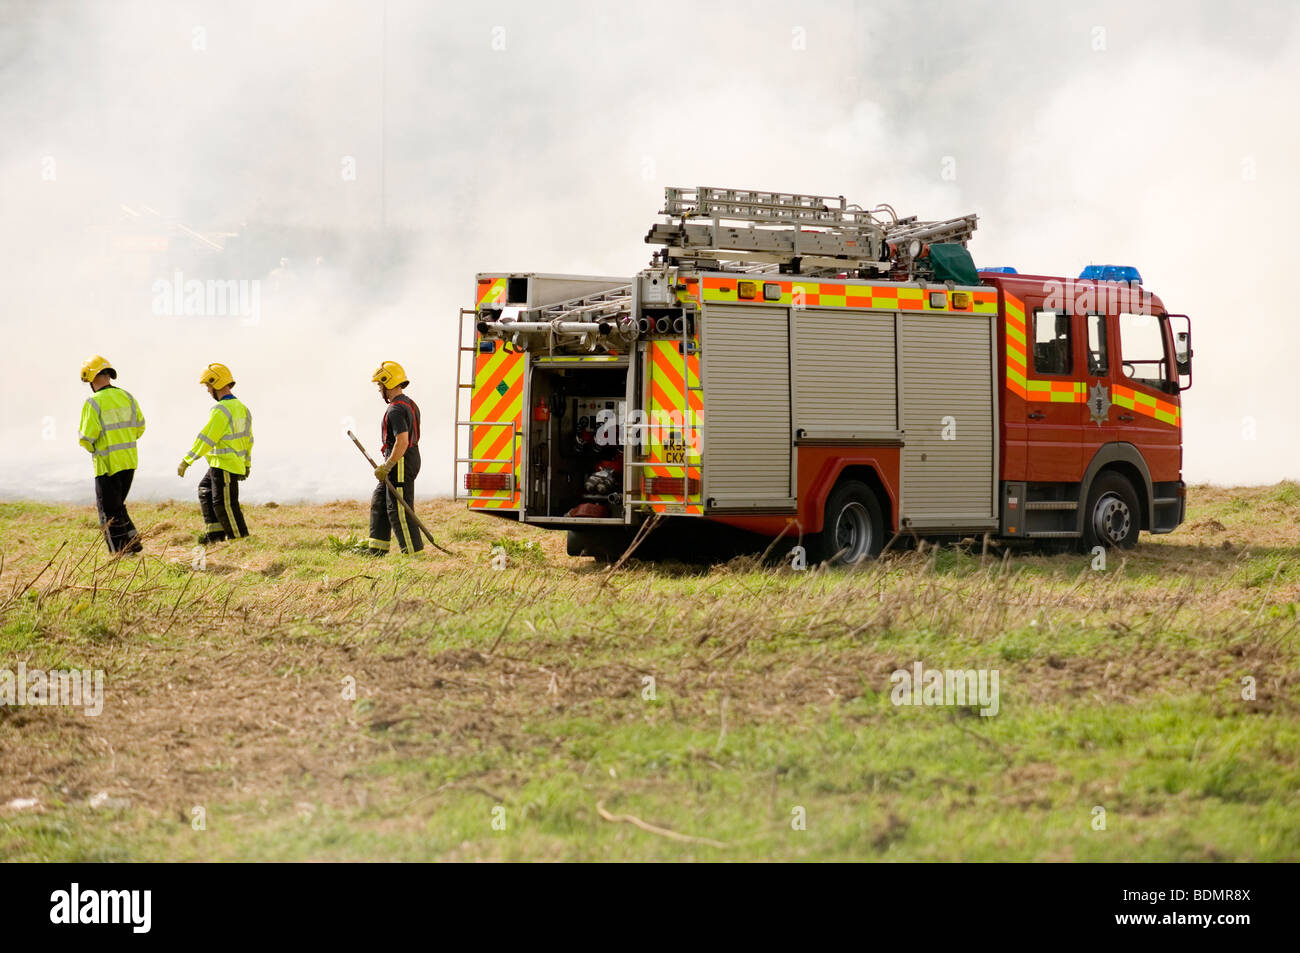 emergency services fire brigade attending a field fire full of thick smoke Stock Photo